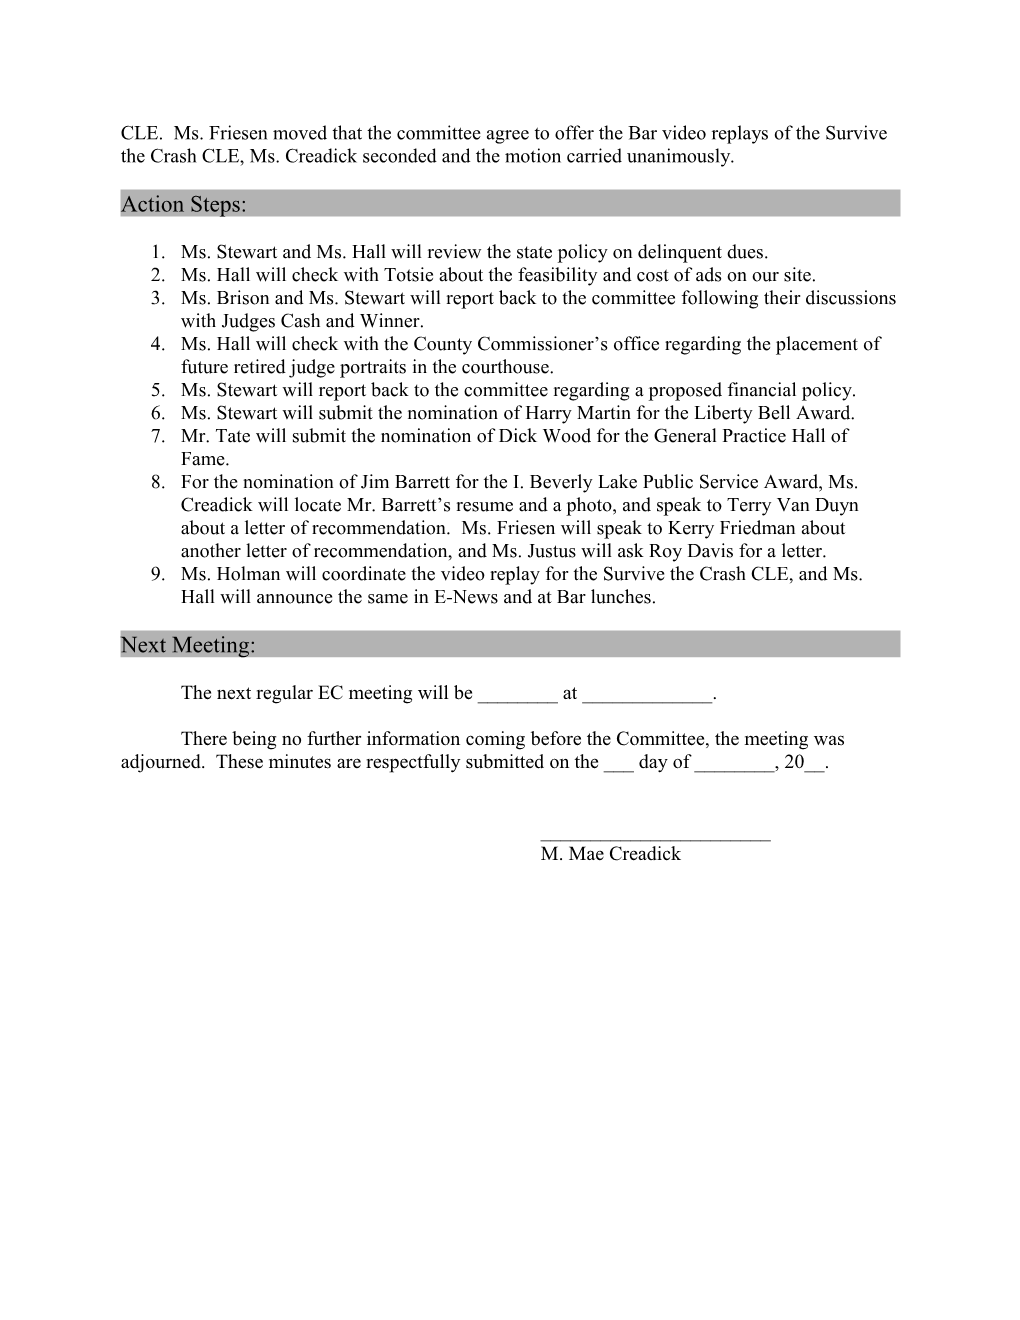 Minutes of the January 4, 2010 Executive Committee Meeting